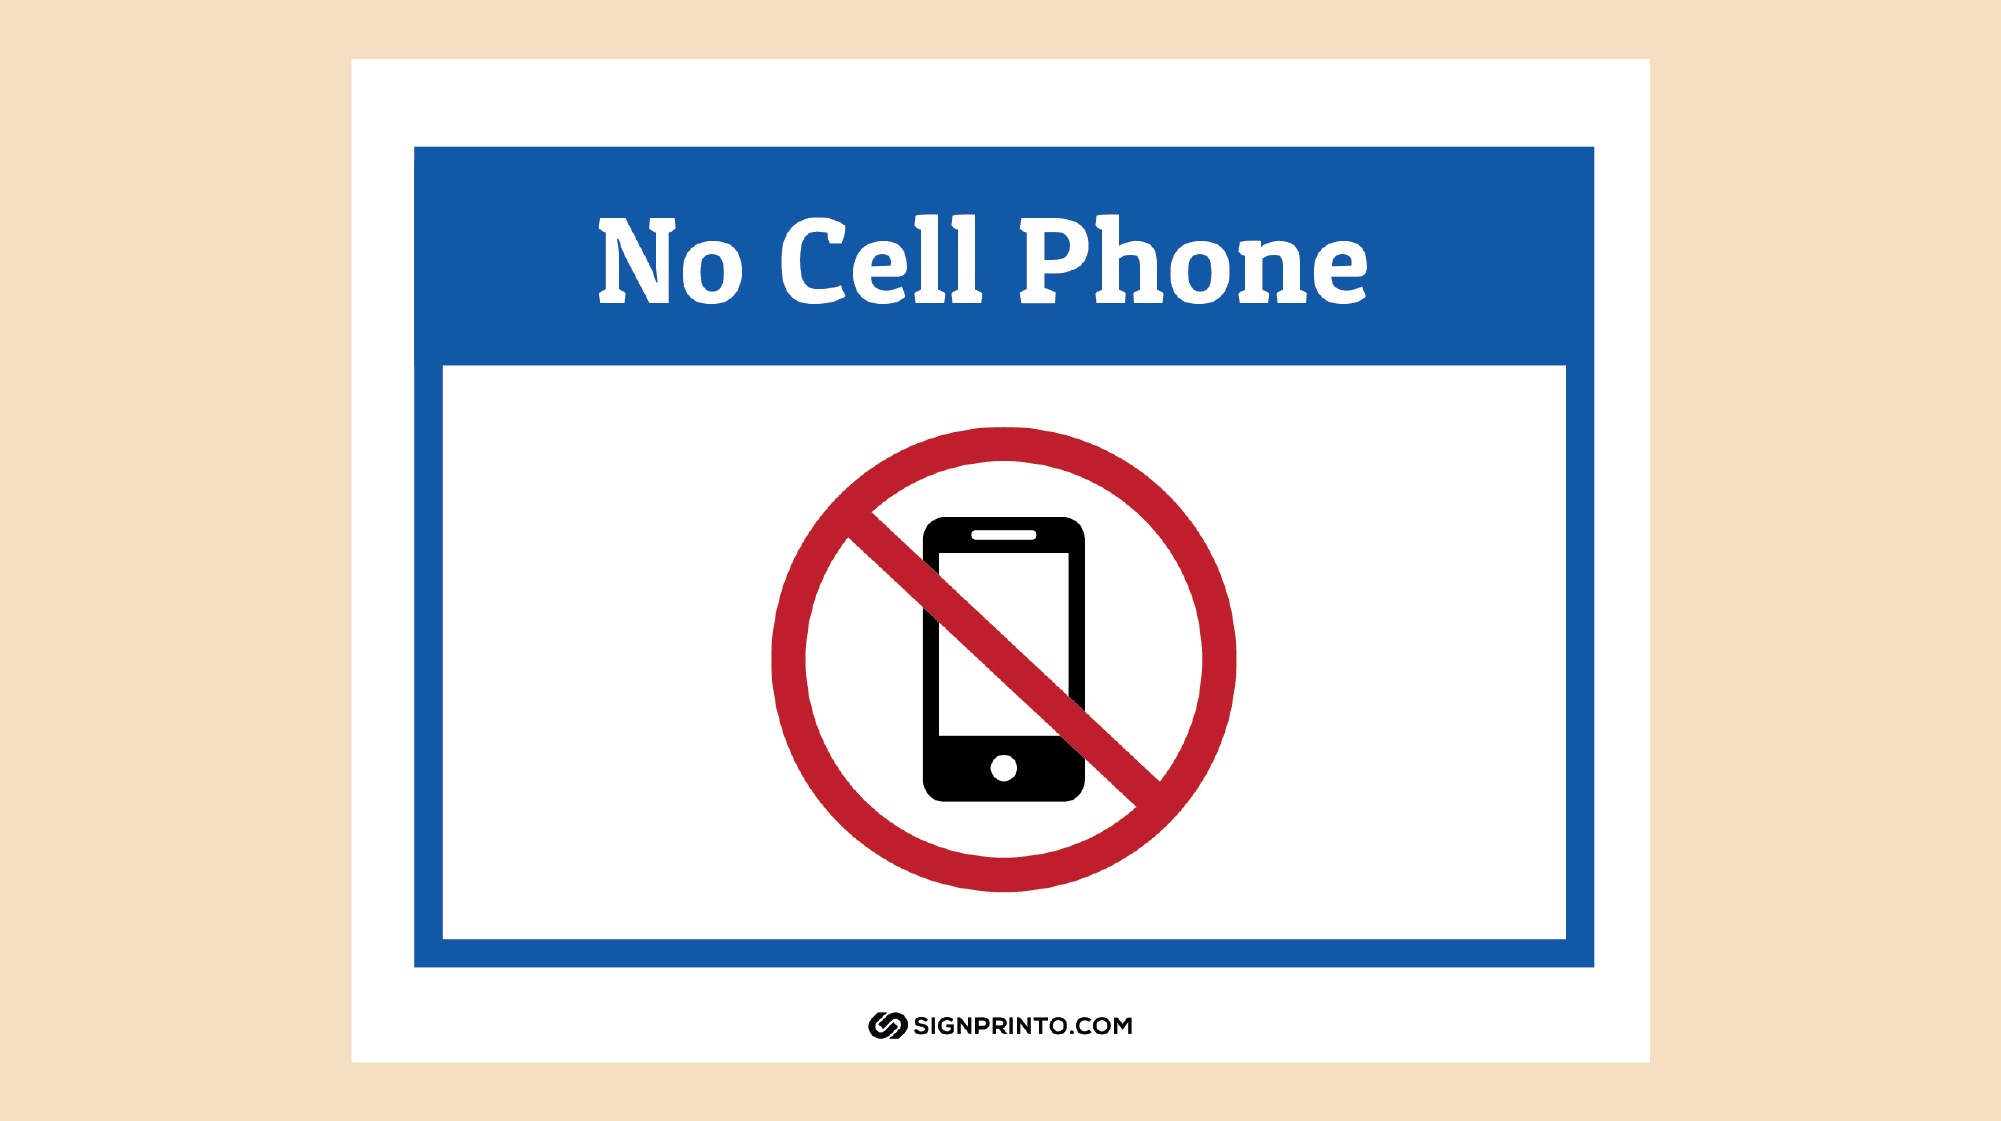 No cell phone sign blue color